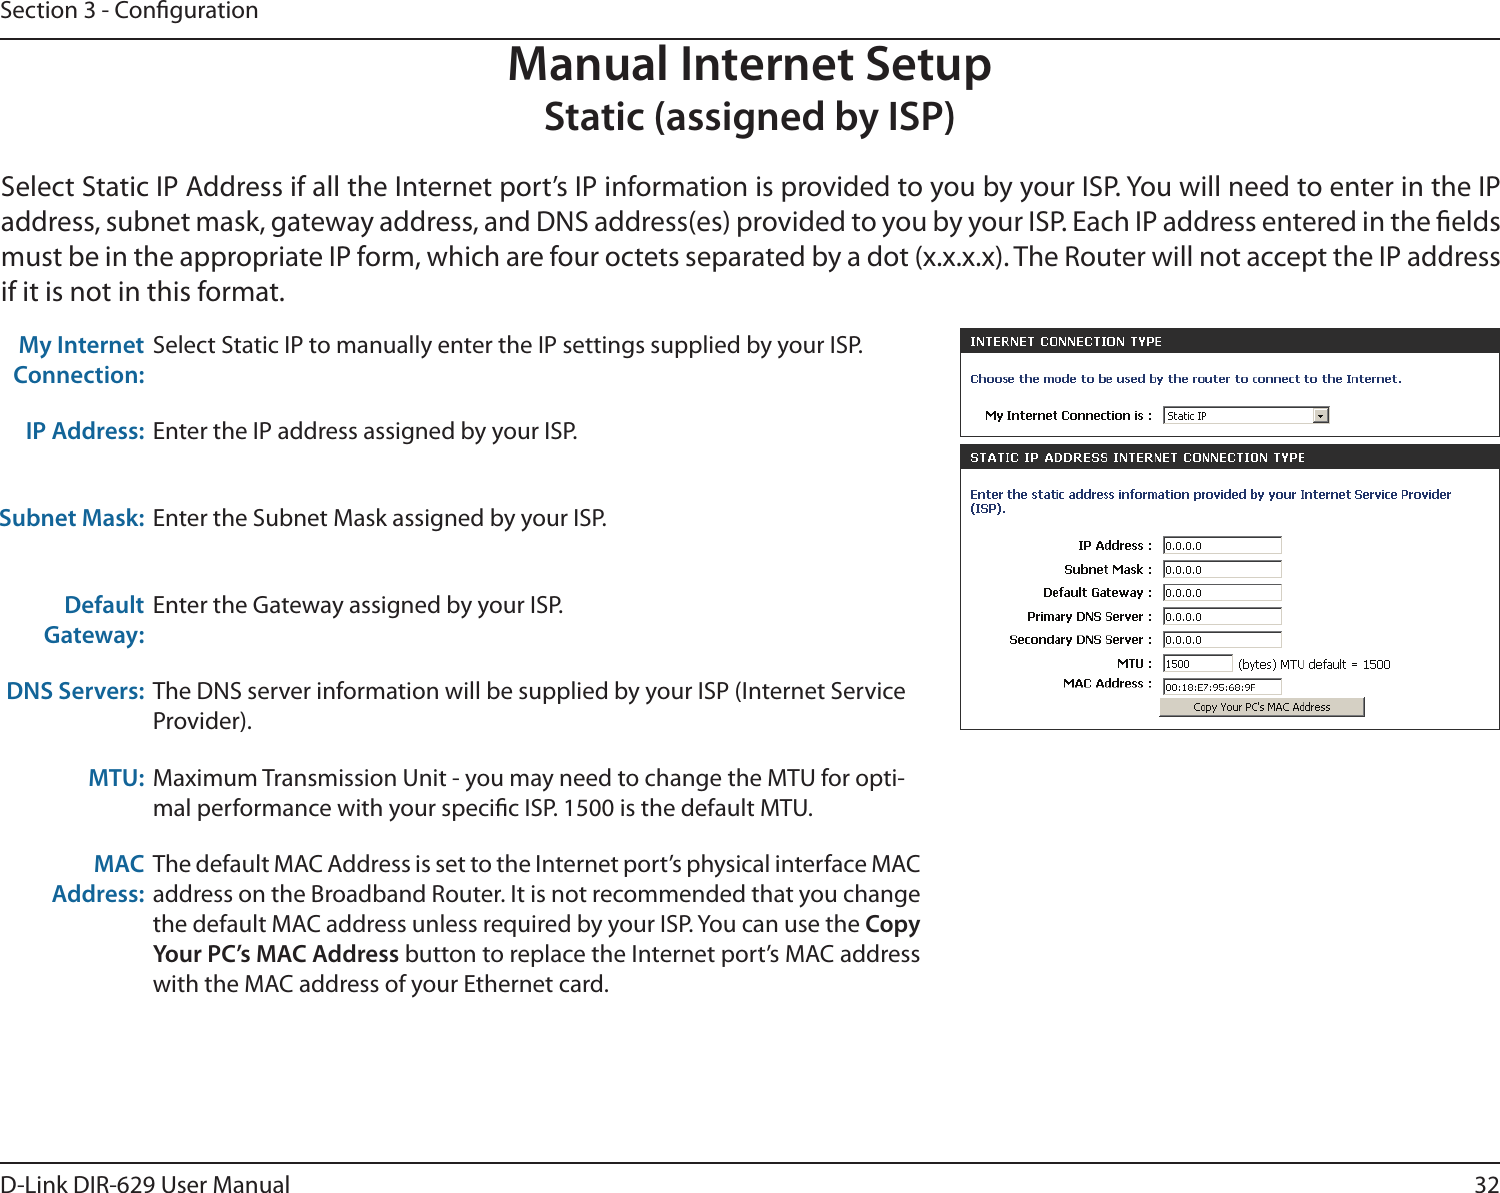 32D-Link DIR-629 User ManualSection 3 - CongurationManual Internet SetupStatic (assigned by ISP)address, subnet mask, gateway address, and DNS address(es) provided to you by your ISP. Each IP address entered in the elds if it is not in this format.My Internet Connection:Select Static IP to manually enter the IP settings supplied by your ISP.IP Address: Enter the IP address assigned by your ISP.Subnet Mask: Enter the Subnet Mask assigned by your ISP.Default Gateway:Enter the Gateway assigned by your ISP.DNS Servers: The DNS server information will be supplied by your ISP (Internet Service Provider).MTU: Maximum Transmission Unit - you may need to change the MTU for opti-mal performance with your specic ISP. 1500 is the default MTU.MAC Address:The default MAC Address is set to the Internet port’s physical interface MAC Copy Your PC’s MAC Address button to replace the Internet port’s MAC address with the MAC address of your Ethernet card.